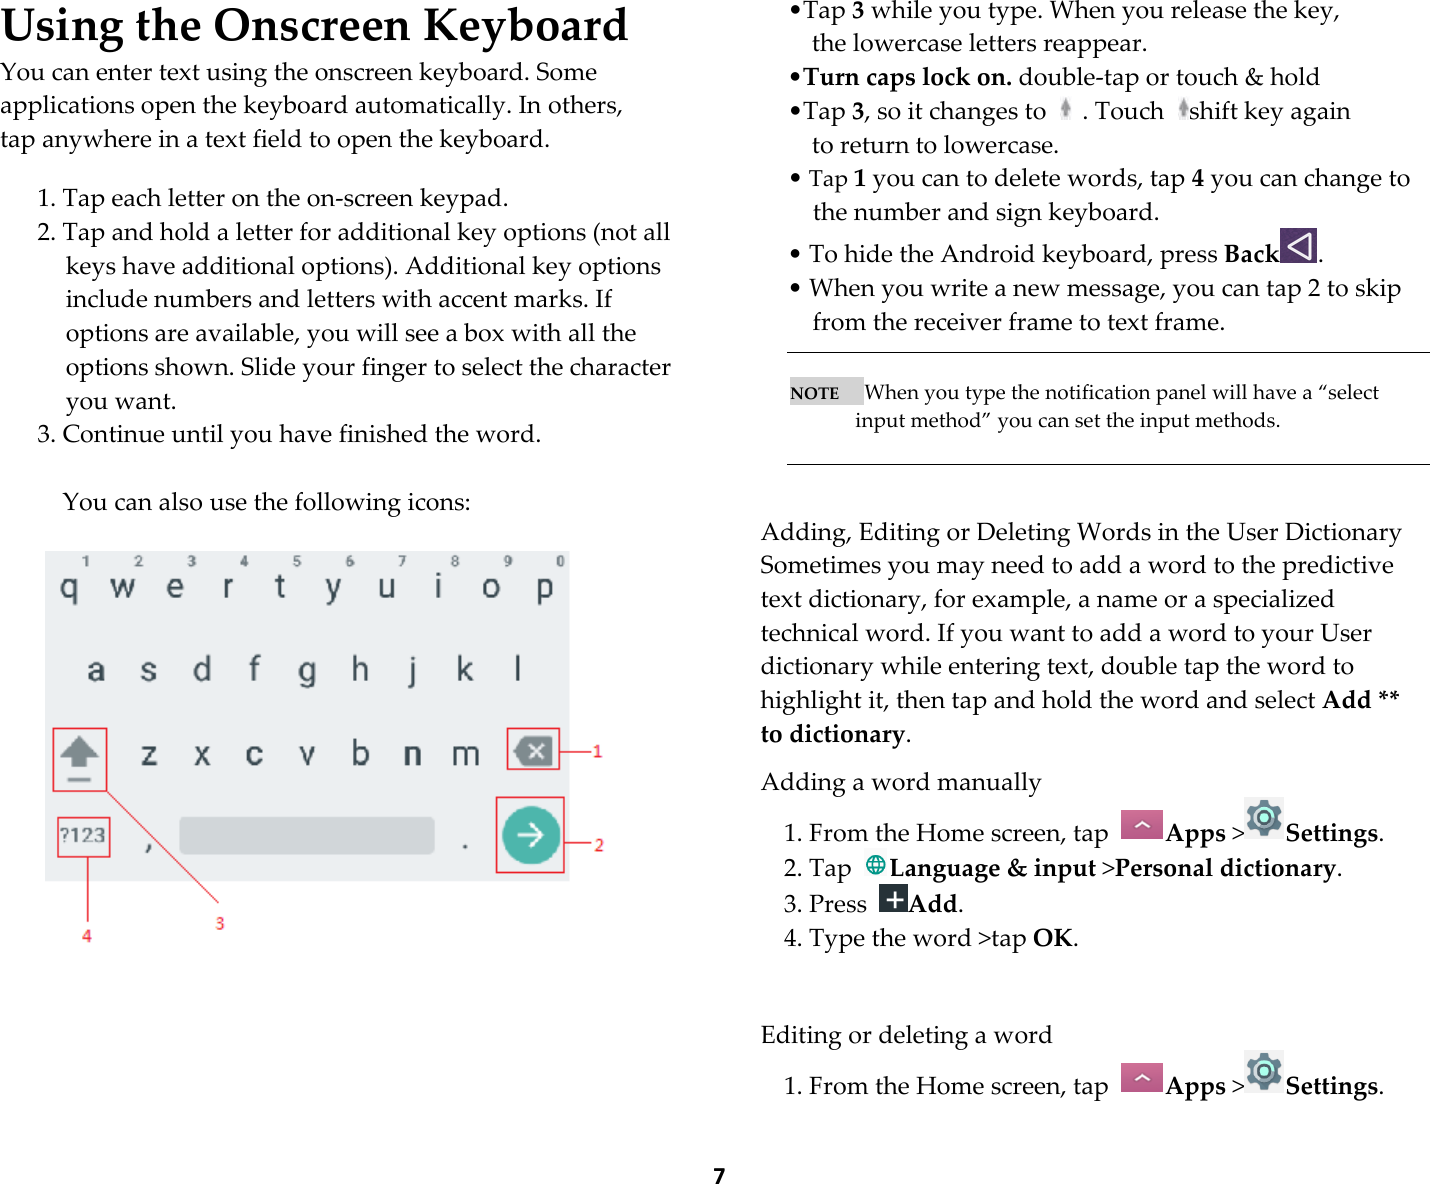  7 Using the Onscreen Keyboard You can enter text using the onscreen keyboard. Some applications open the keyboard automatically. In others,    tap anywhere in a text field to open the keyboard.  1. Tap each letter on the on-screen keypad. 2. Tap and hold a letter for additional key options (not all keys have additional options). Additional key options include numbers and letters with accent marks. If options are available, you will see a box with all the options shown. Slide your finger to select the character you want. 3. Continue until you have finished the word.  You can also use the following icons:         •Tap 3 while you type. When you release the key,   the lowercase letters reappear.   •Turn caps lock on. double-tap or touch &amp; hold   •Tap 3, so it changes to    . Touch  shift key again   to return to lowercase. • Tap 1 you can to delete words, tap 4 you can change to the number and sign keyboard. • To hide the Android keyboard, press Back .    • When you write a new message, you can tap 2 to skip from the receiver frame to text frame.       NOTE      When you type the notification panel will have a “select input method” you can set the input methods.    Adding, Editing or Deleting Words in the User Dictionary Sometimes you may need to add a word to the predictive text dictionary, for example, a name or a specialized technical word. If you want to add a word to your User dictionary while entering text, double tap the word to highlight it, then tap and hold the word and select Add ** to dictionary.  Adding a word manually 1. From the Home screen, tap  Apps &gt;Settings.   2. Tap  Language &amp; input &gt;Personal dictionary. 3. Press  Add. 4. Type the word &gt;tap OK.     Editing or deleting a word 1. From the Home screen, tap  Apps &gt;Settings.   